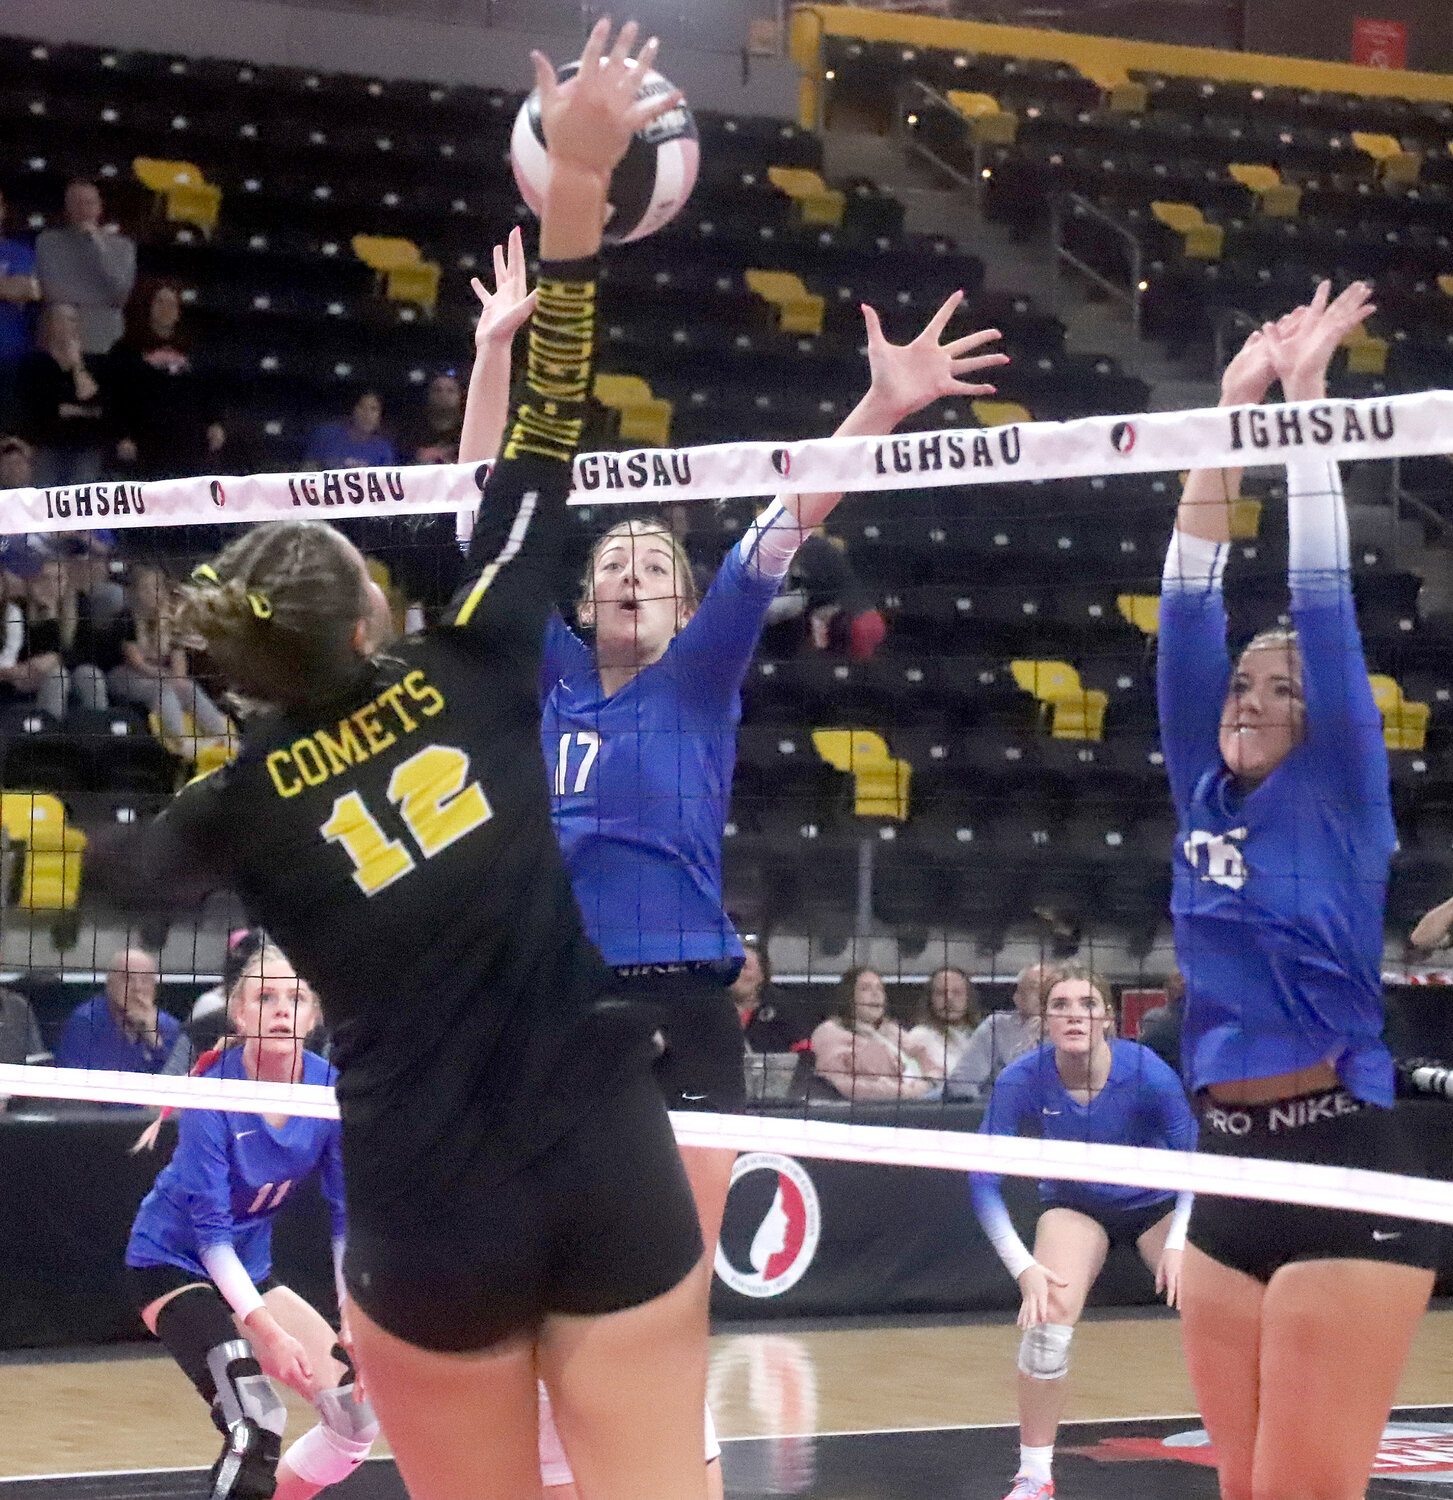 Savanna Nilles of Boyden-Hull attacks over Holy Trinity's defense in the third set Wednesday at the IGHSAU state volleyball tournament in Coralville. The Crusaders swept Boyden-Hull to advance to the state title match Thursday at 7 p.m.